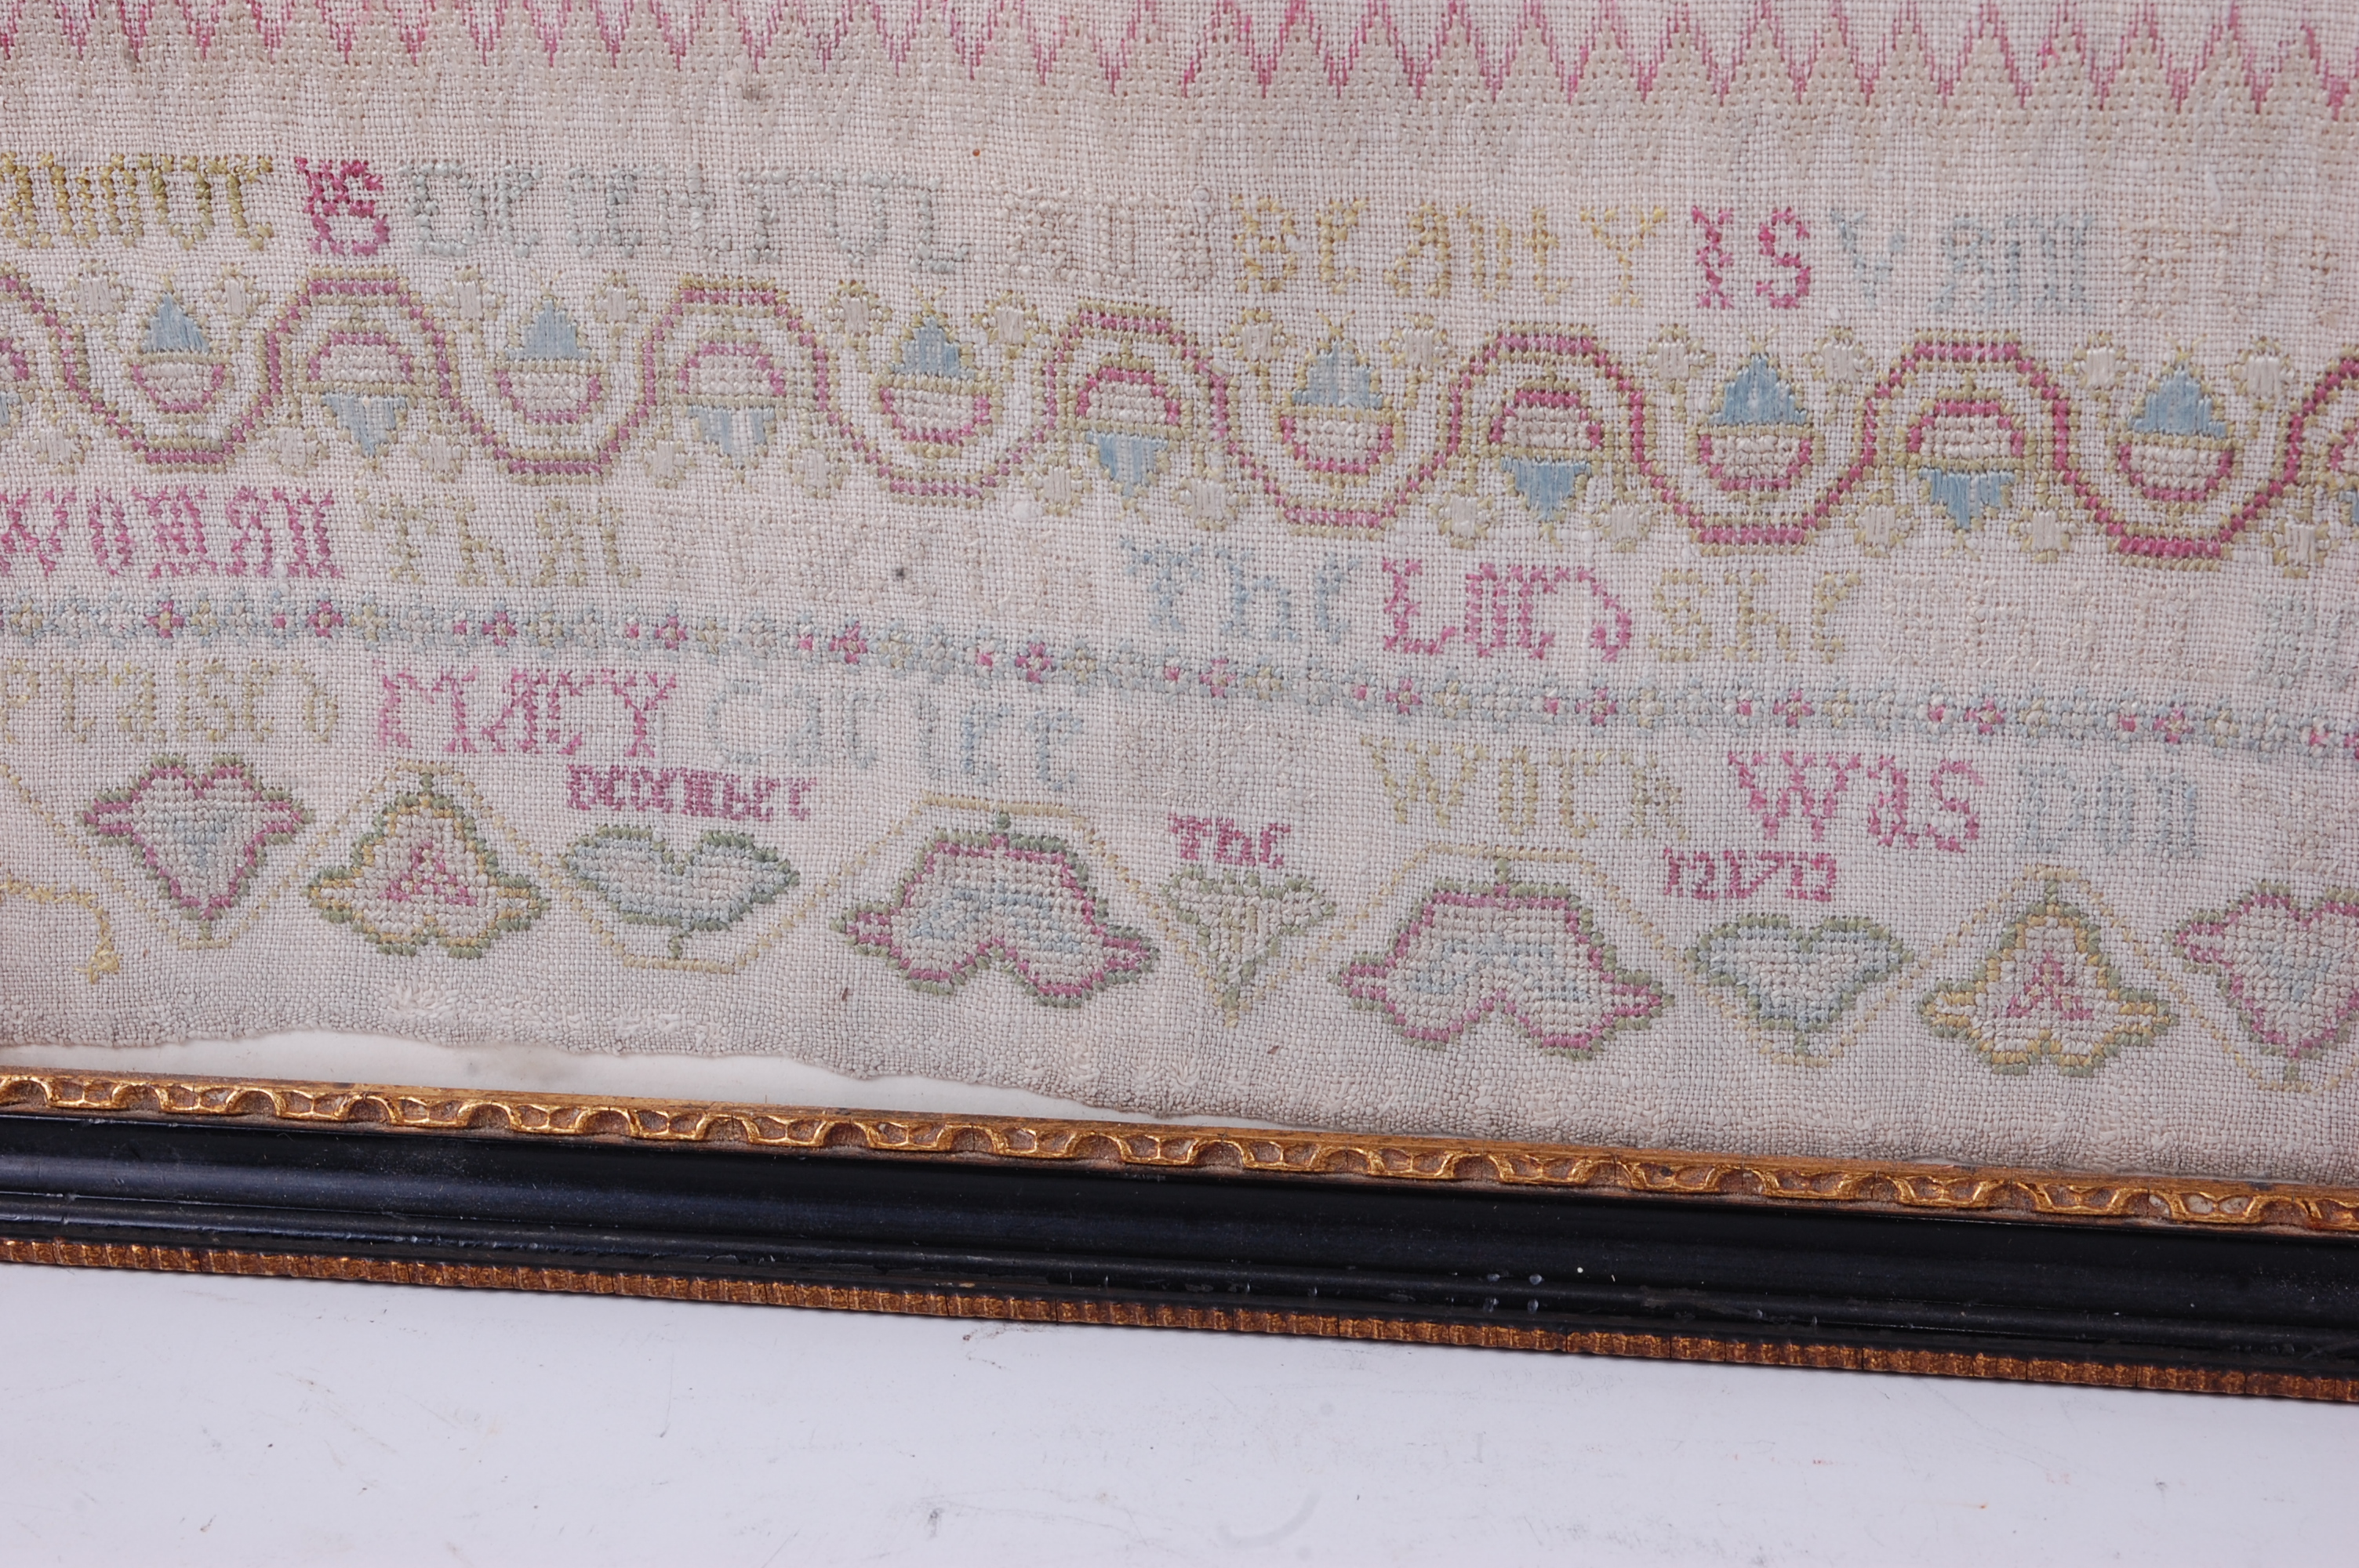 An early 18th century needlework, verse, number and picture sampler, - Image 2 of 5